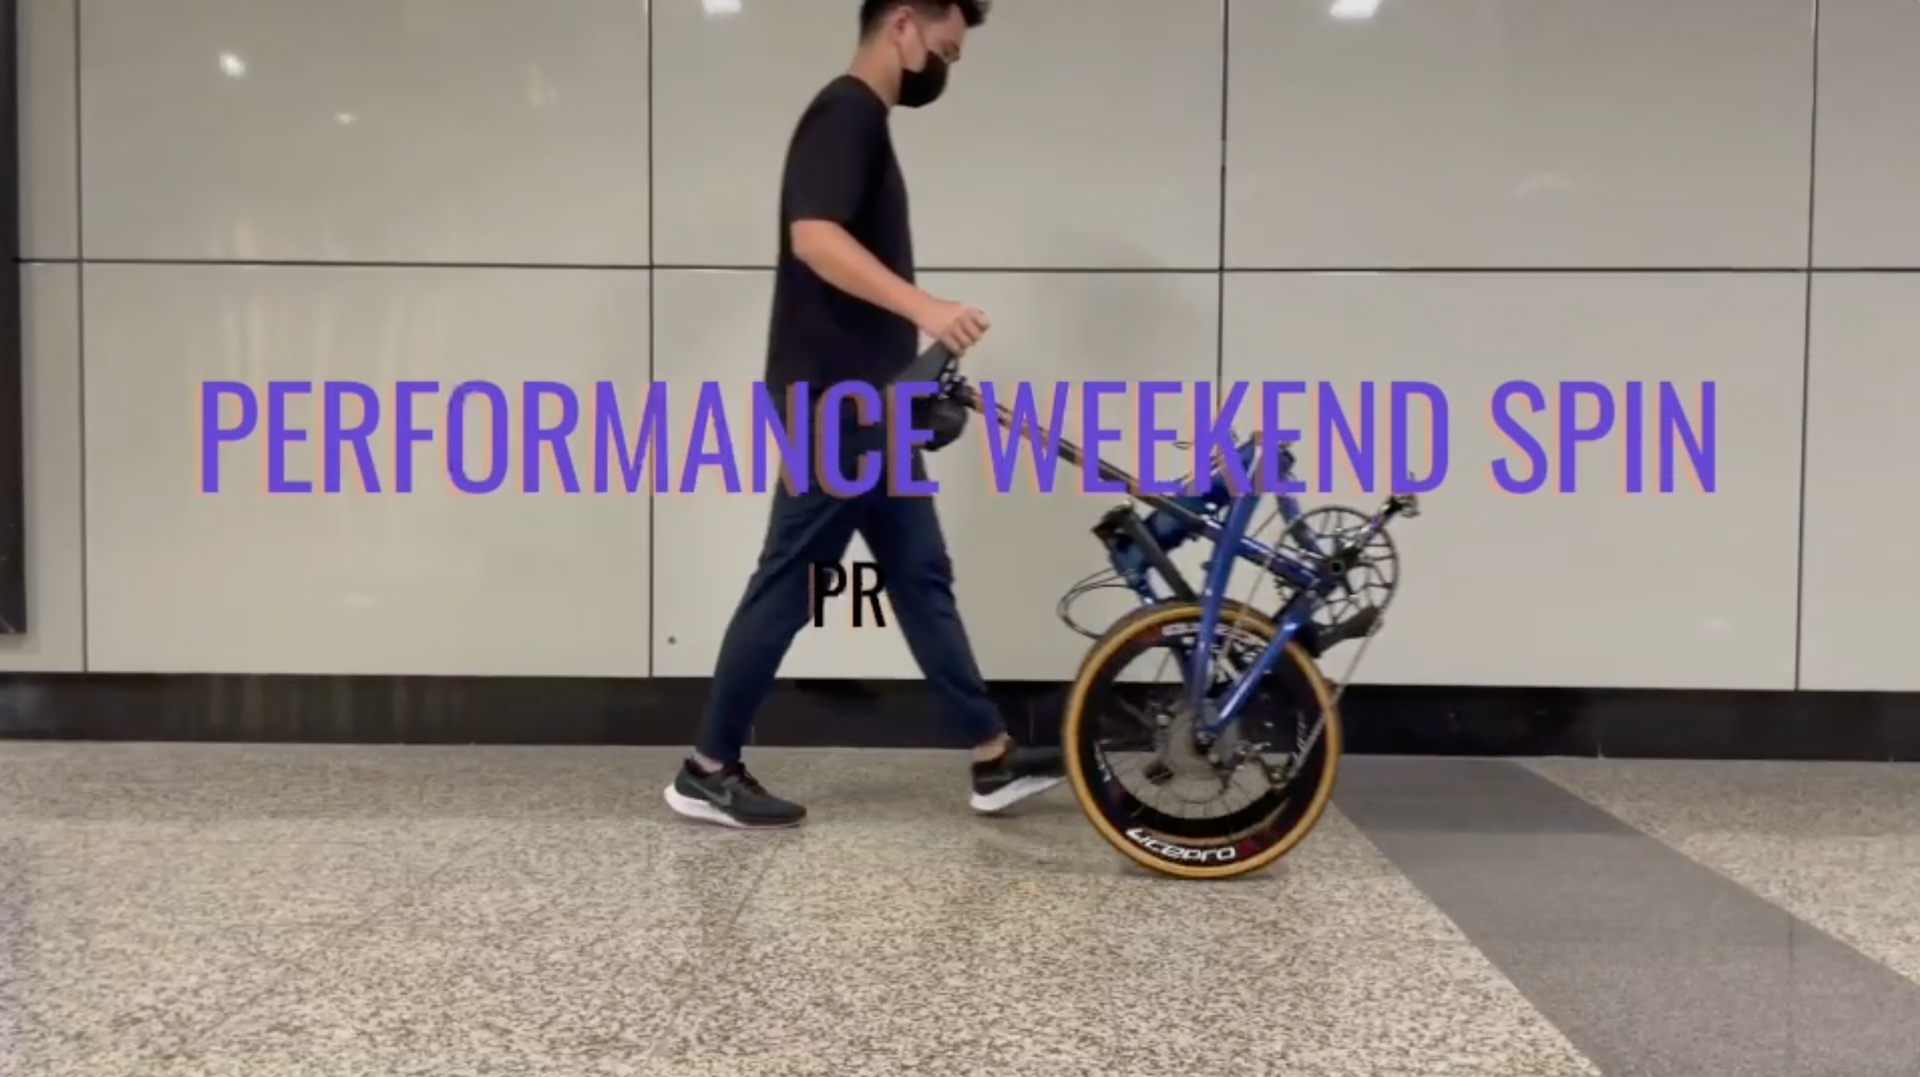 Load video: Foldable bicycles on MRT? No problem!